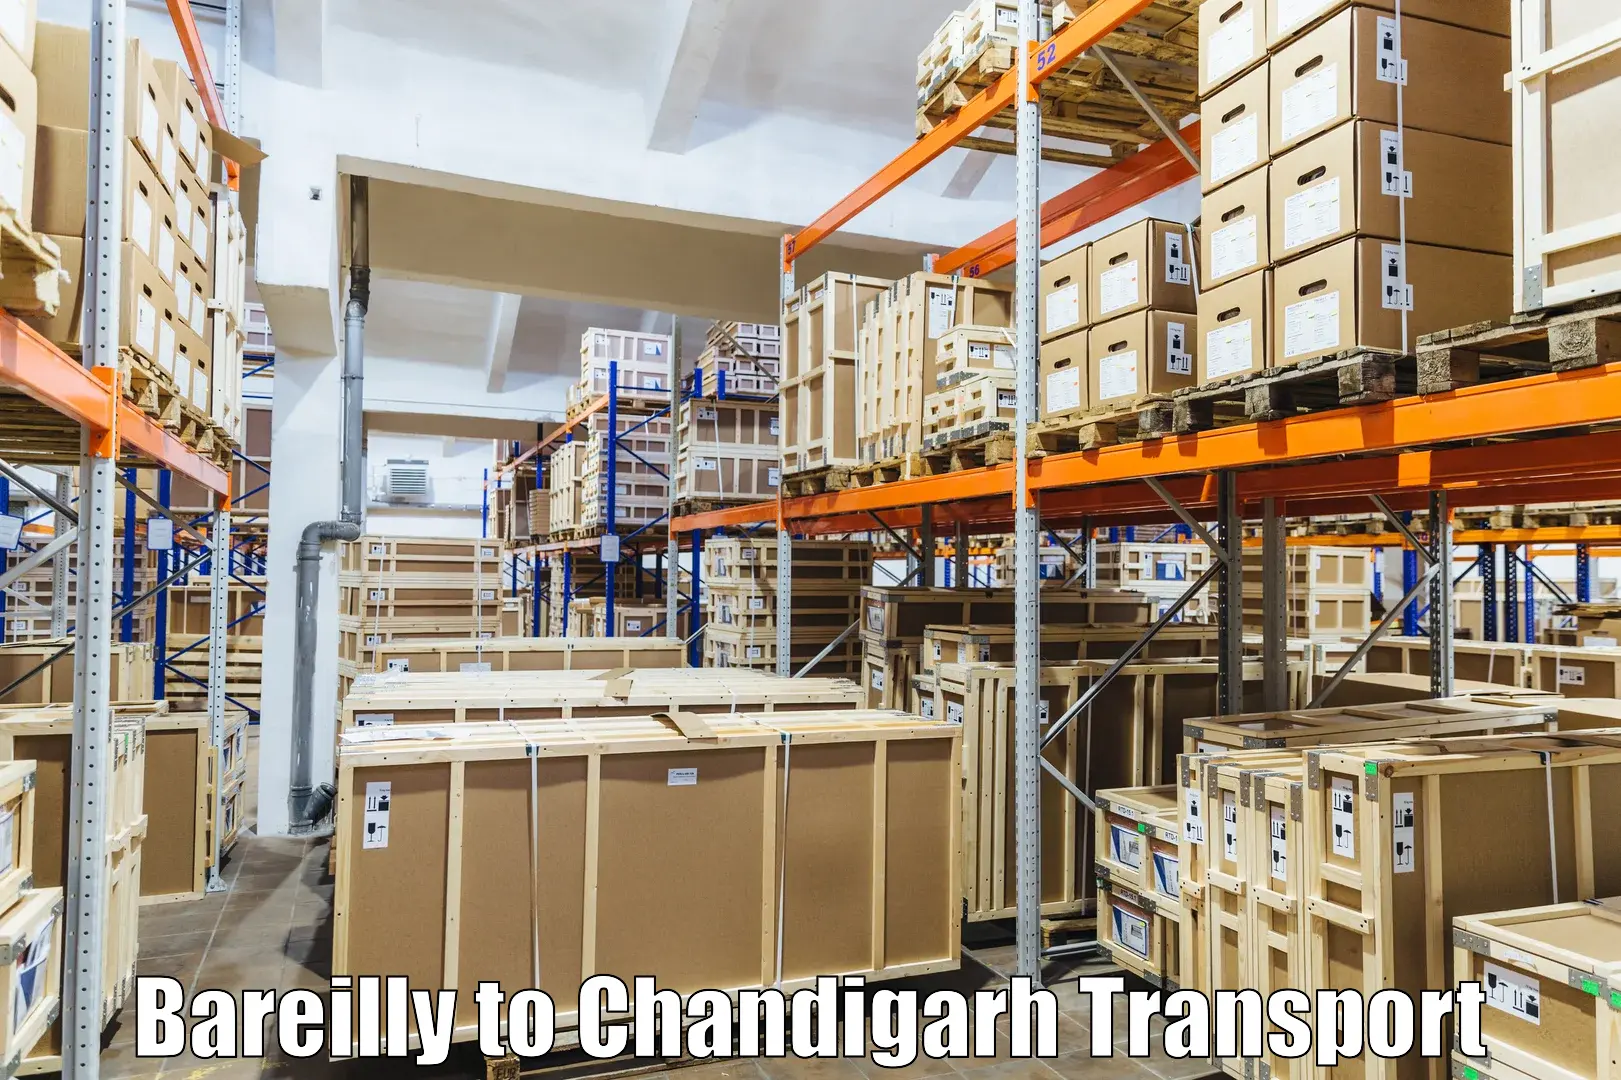 Nearby transport service Bareilly to Chandigarh